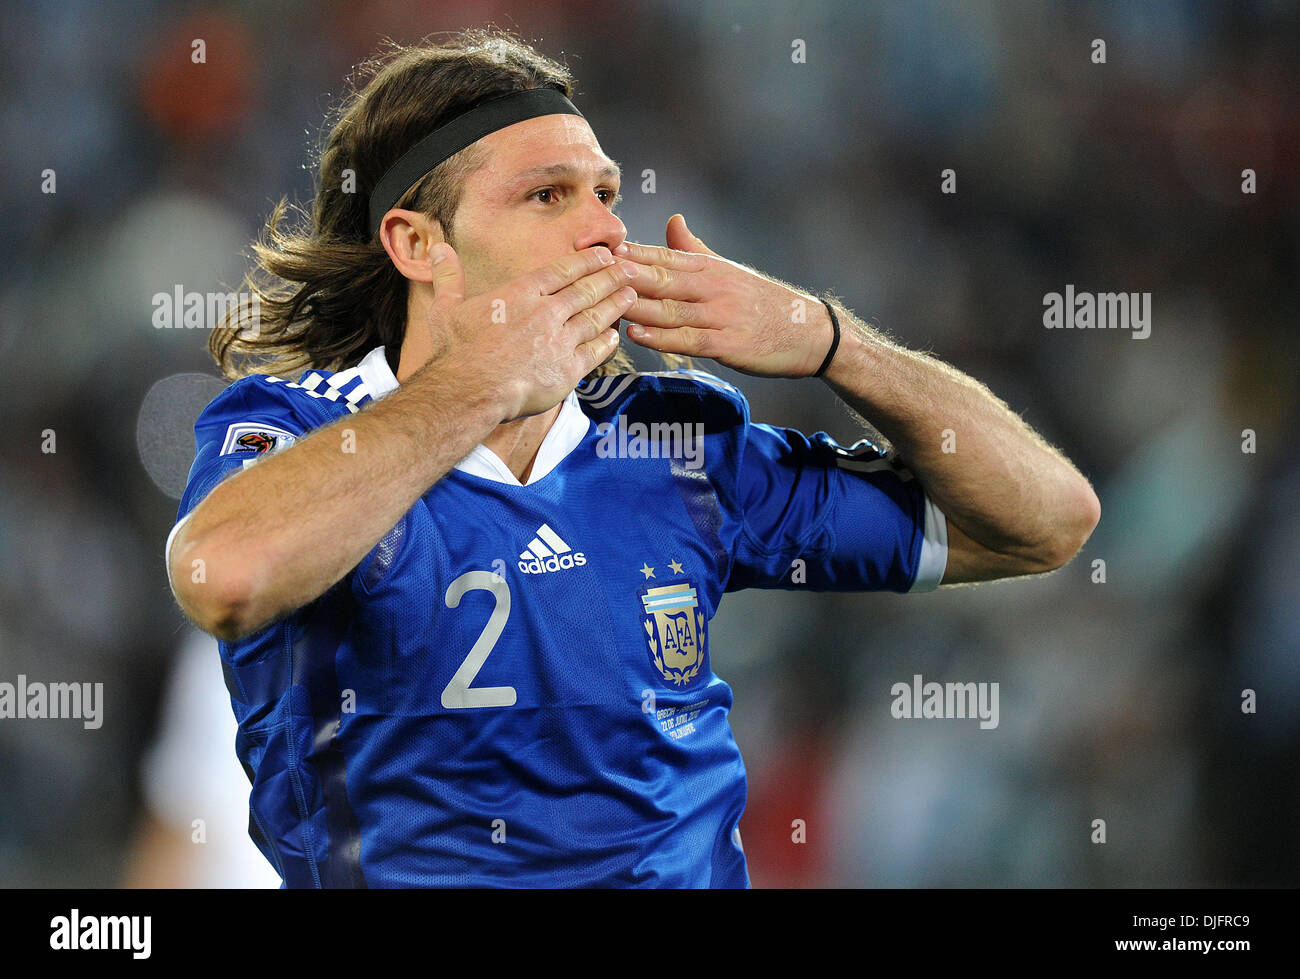 June 22, 2010 - Polokwane, South Africa - Martin Demichelis of Argentina celebrates after scoring during the 2010 FIFA World Cup soccer match between Greece and Argentina at Peter Mokaba Stadium on June 22, 2010 in Polokwane, South Africa. (Credit Image: © Luca Ghidoni/ZUMApress.com) Stock Photo